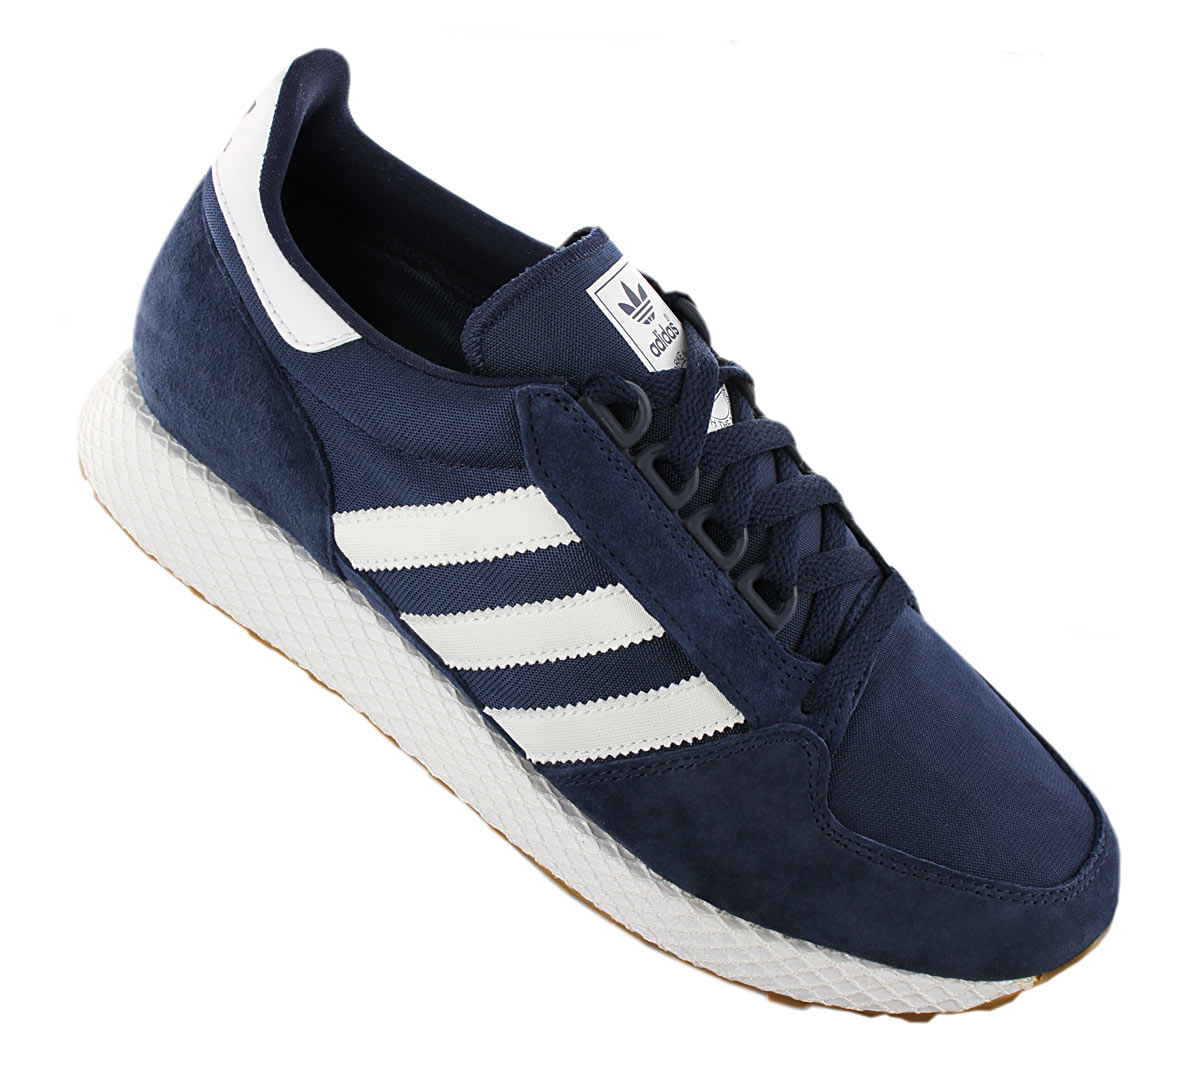 NEW adidas Originals Forest Grove B41529 Men´s Shoes Trainers Sneakers SALE  | eBay